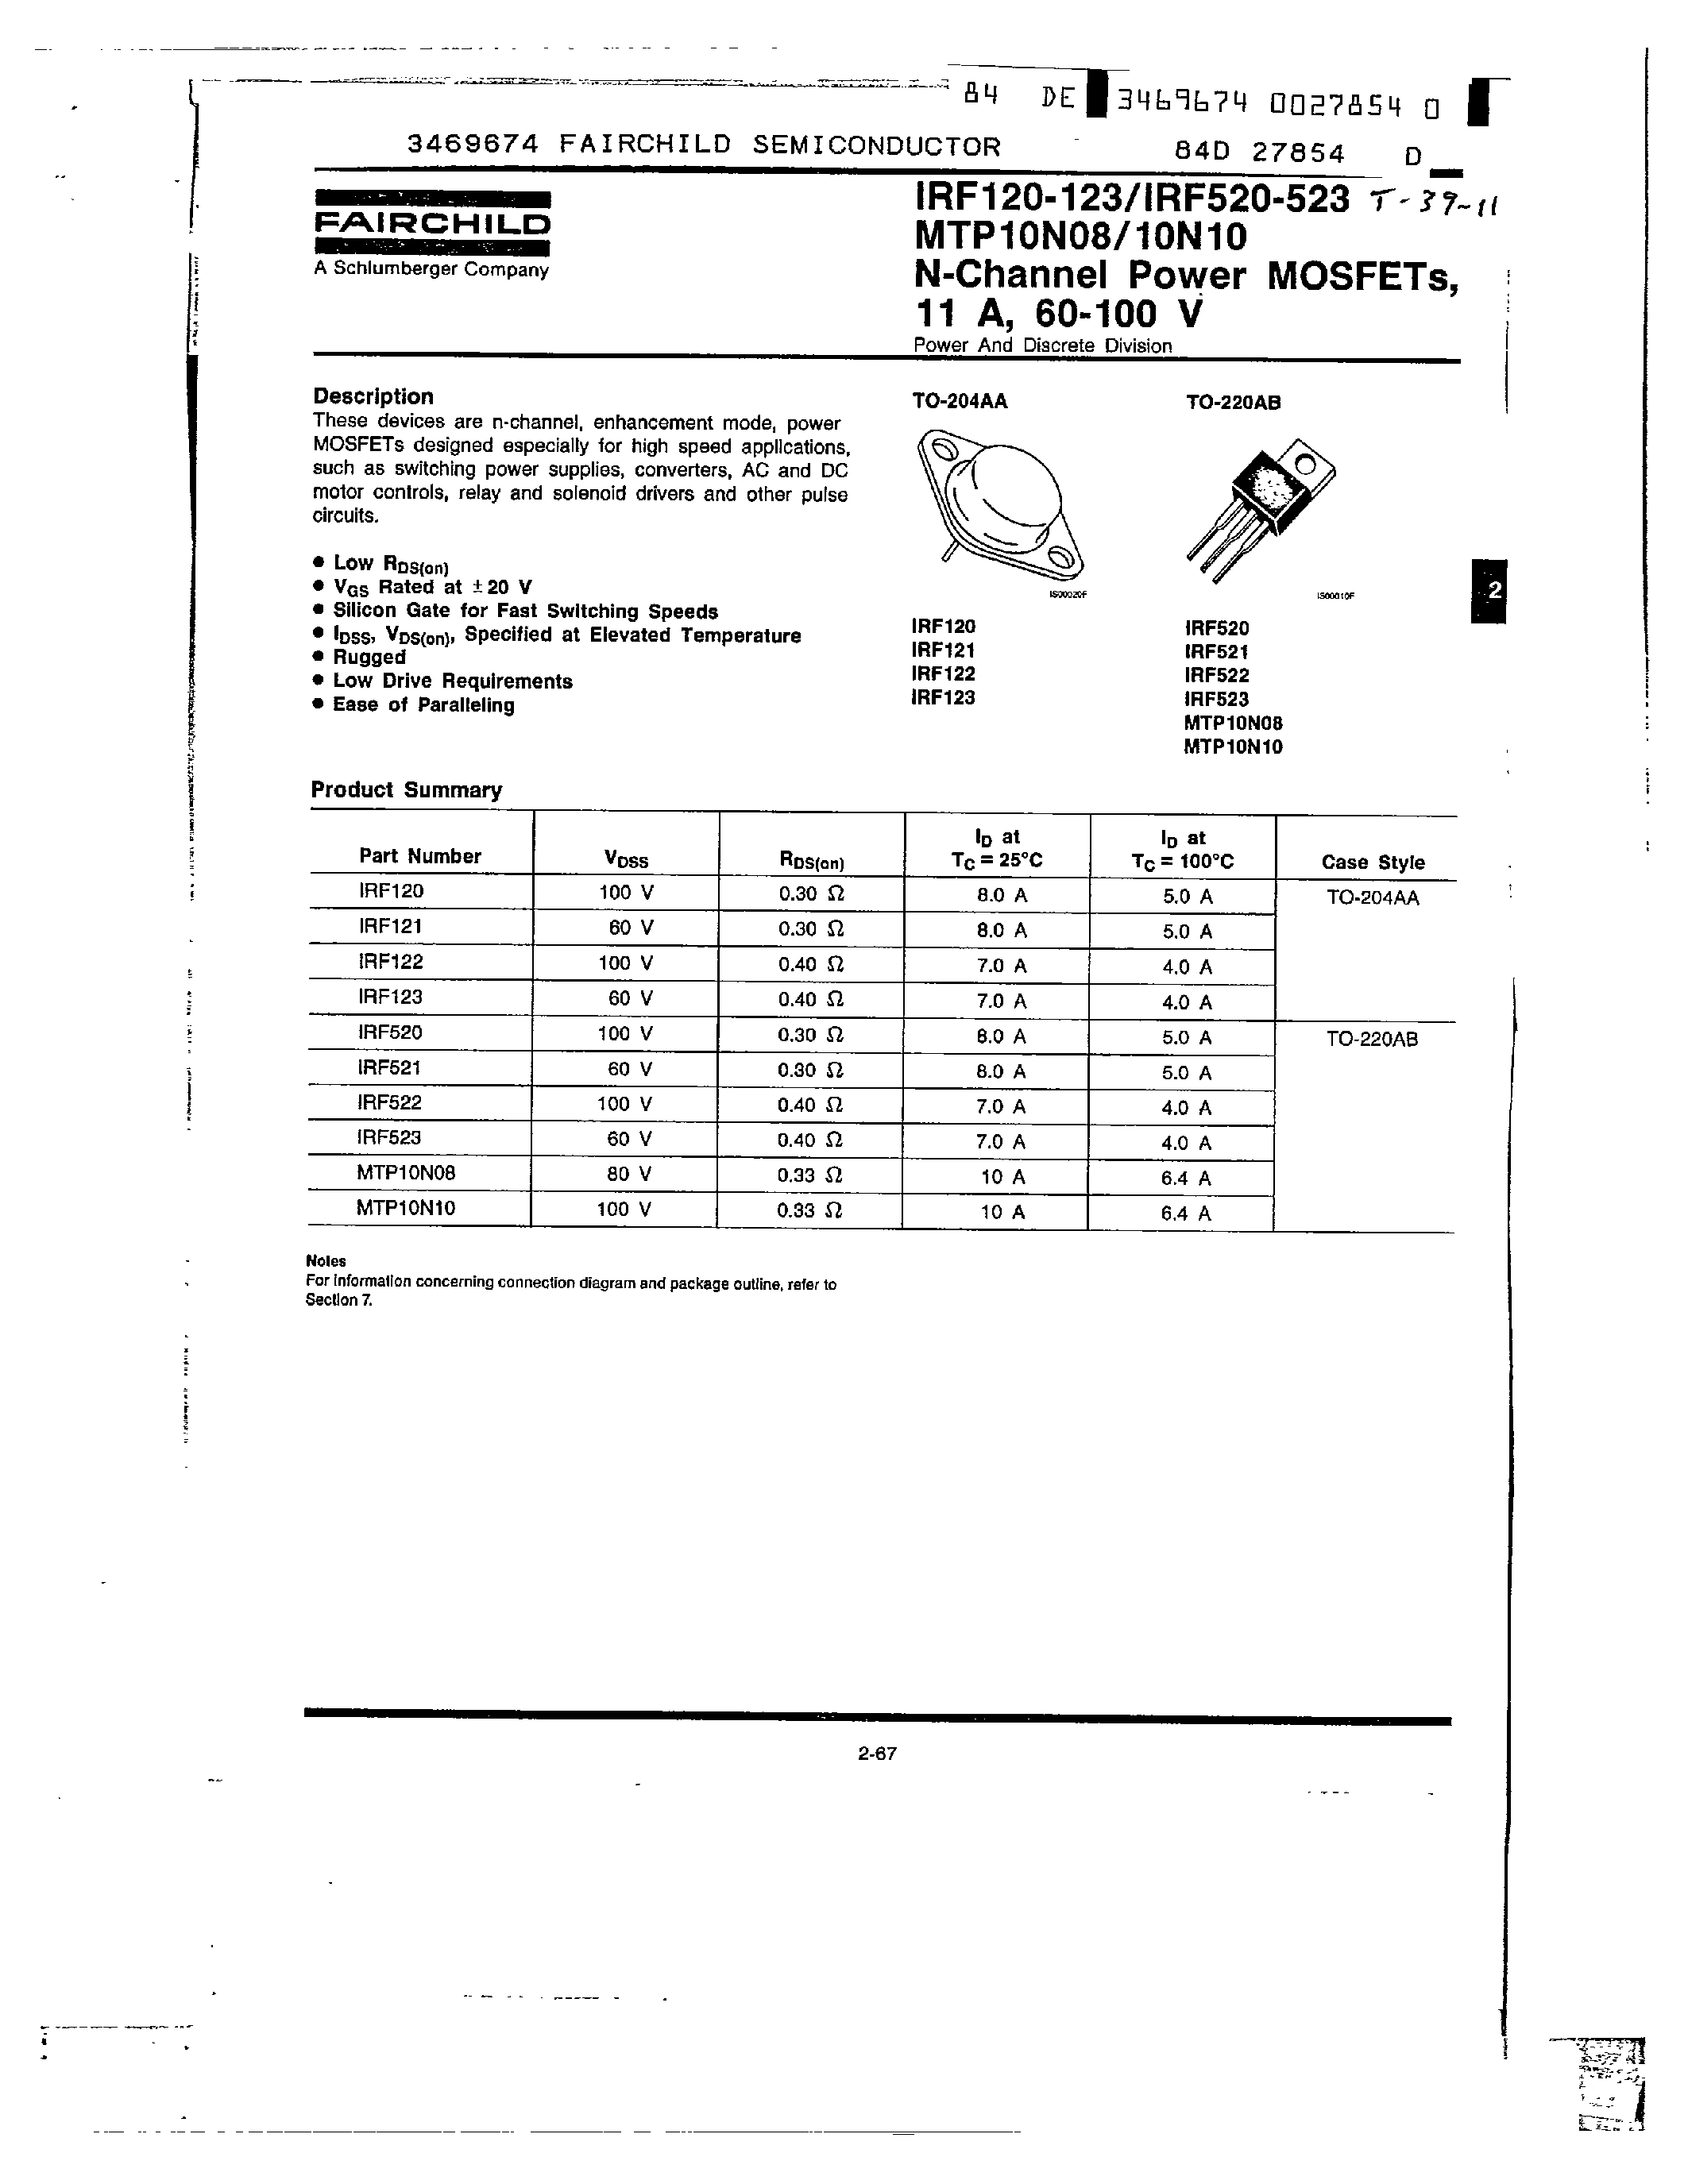 Datasheet IRF122 - N-Channel Power MOSFETs/ 11 A/ 60-100 V page 1